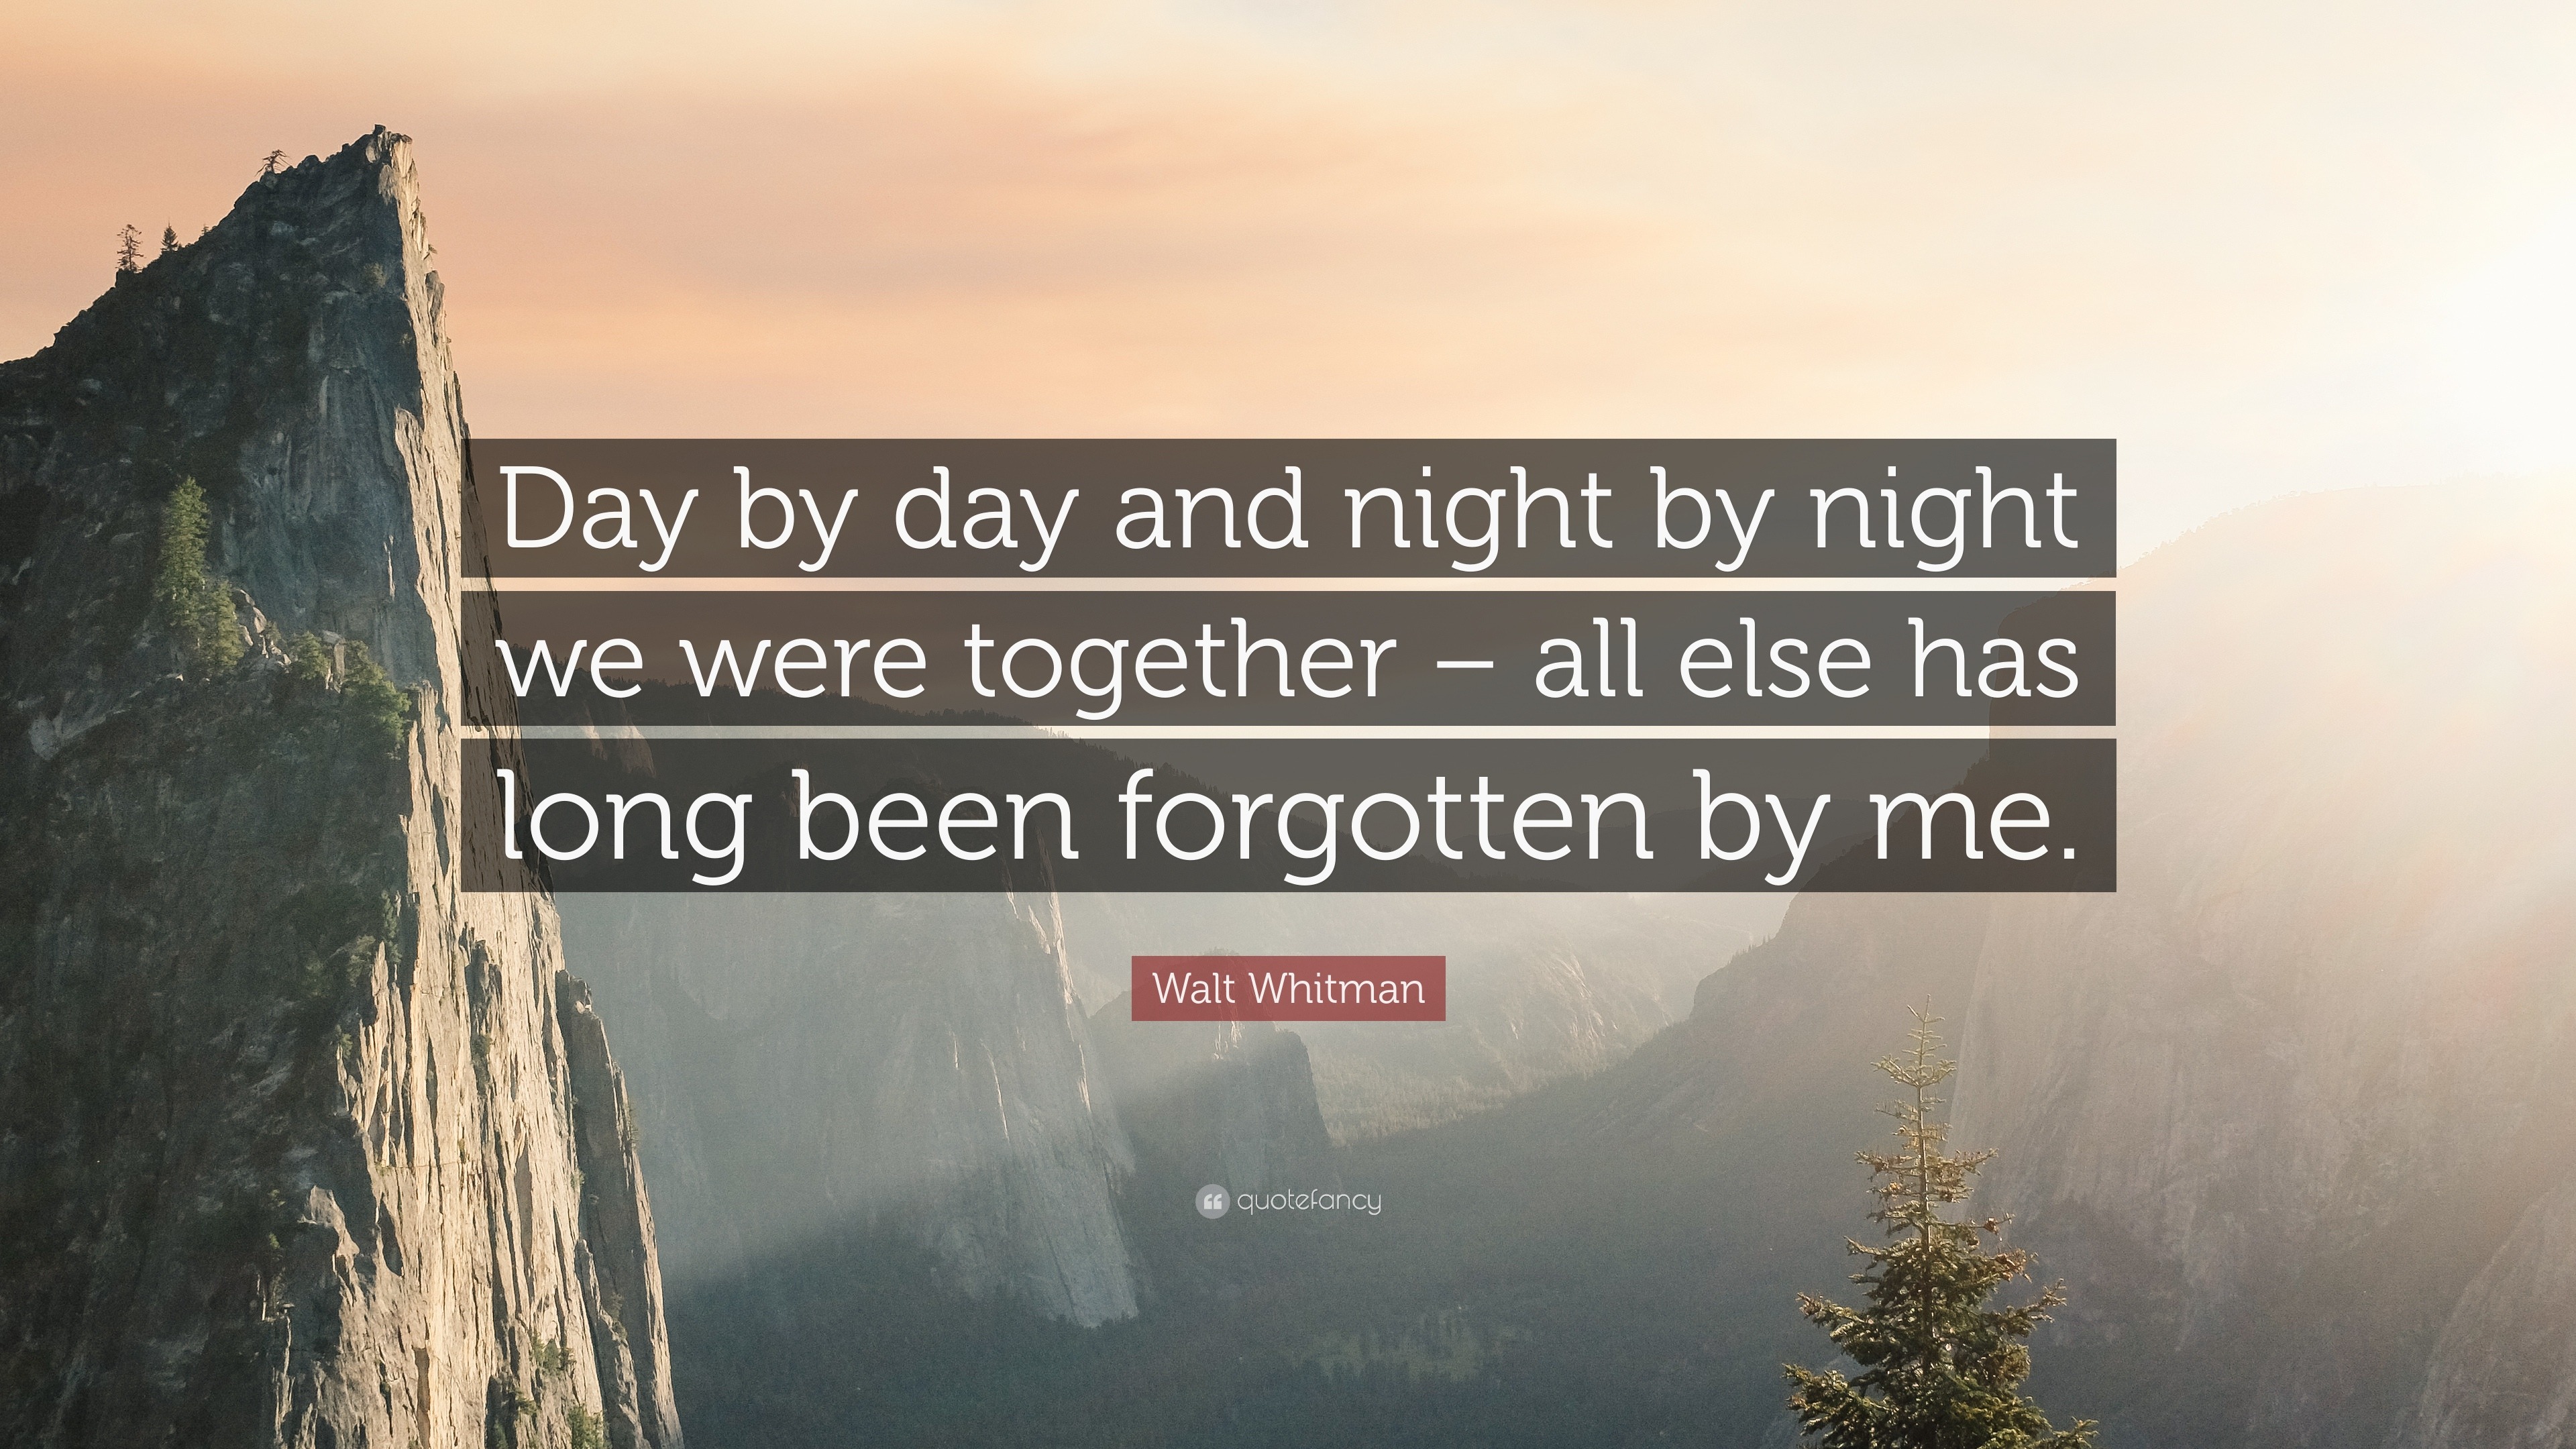 Walt Whitman Quote “Day by day and night by night we were together